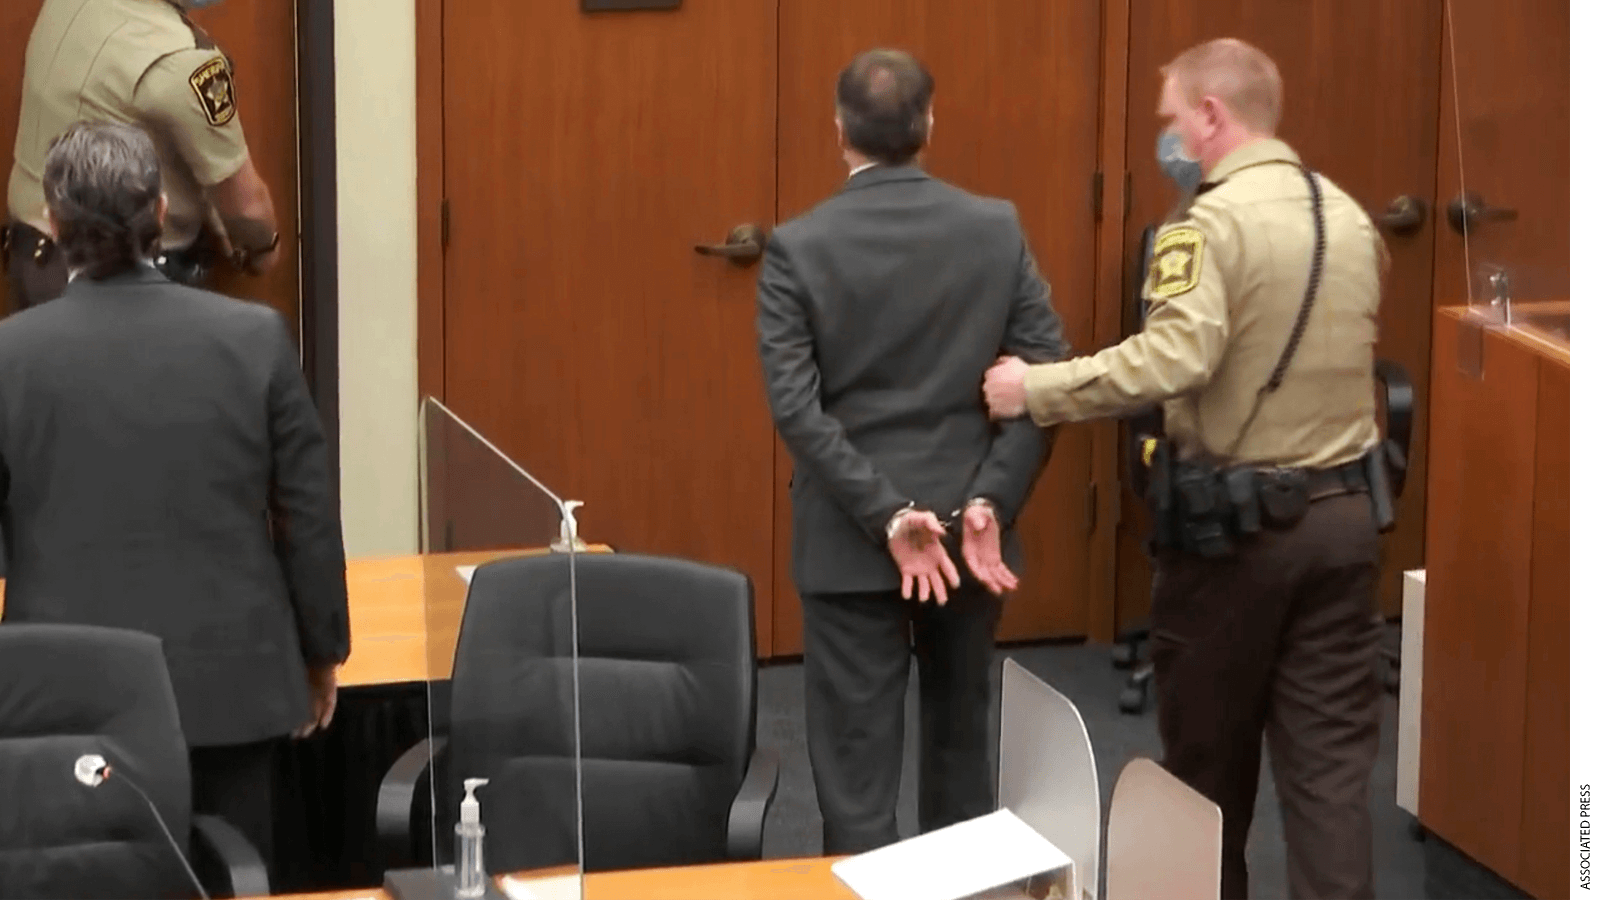 In this image from video, former Minneapolis police Officer Derek Chauvin, center, is taken into custody as his attorney, Eric Nelson, left, looks on, after the verdicts were read at Chauvin's trial for the 2020 death of George Floyd, Tuesday, April 20, 2021, at the Hennepin County Courthouse in Minneapolis, Minn.